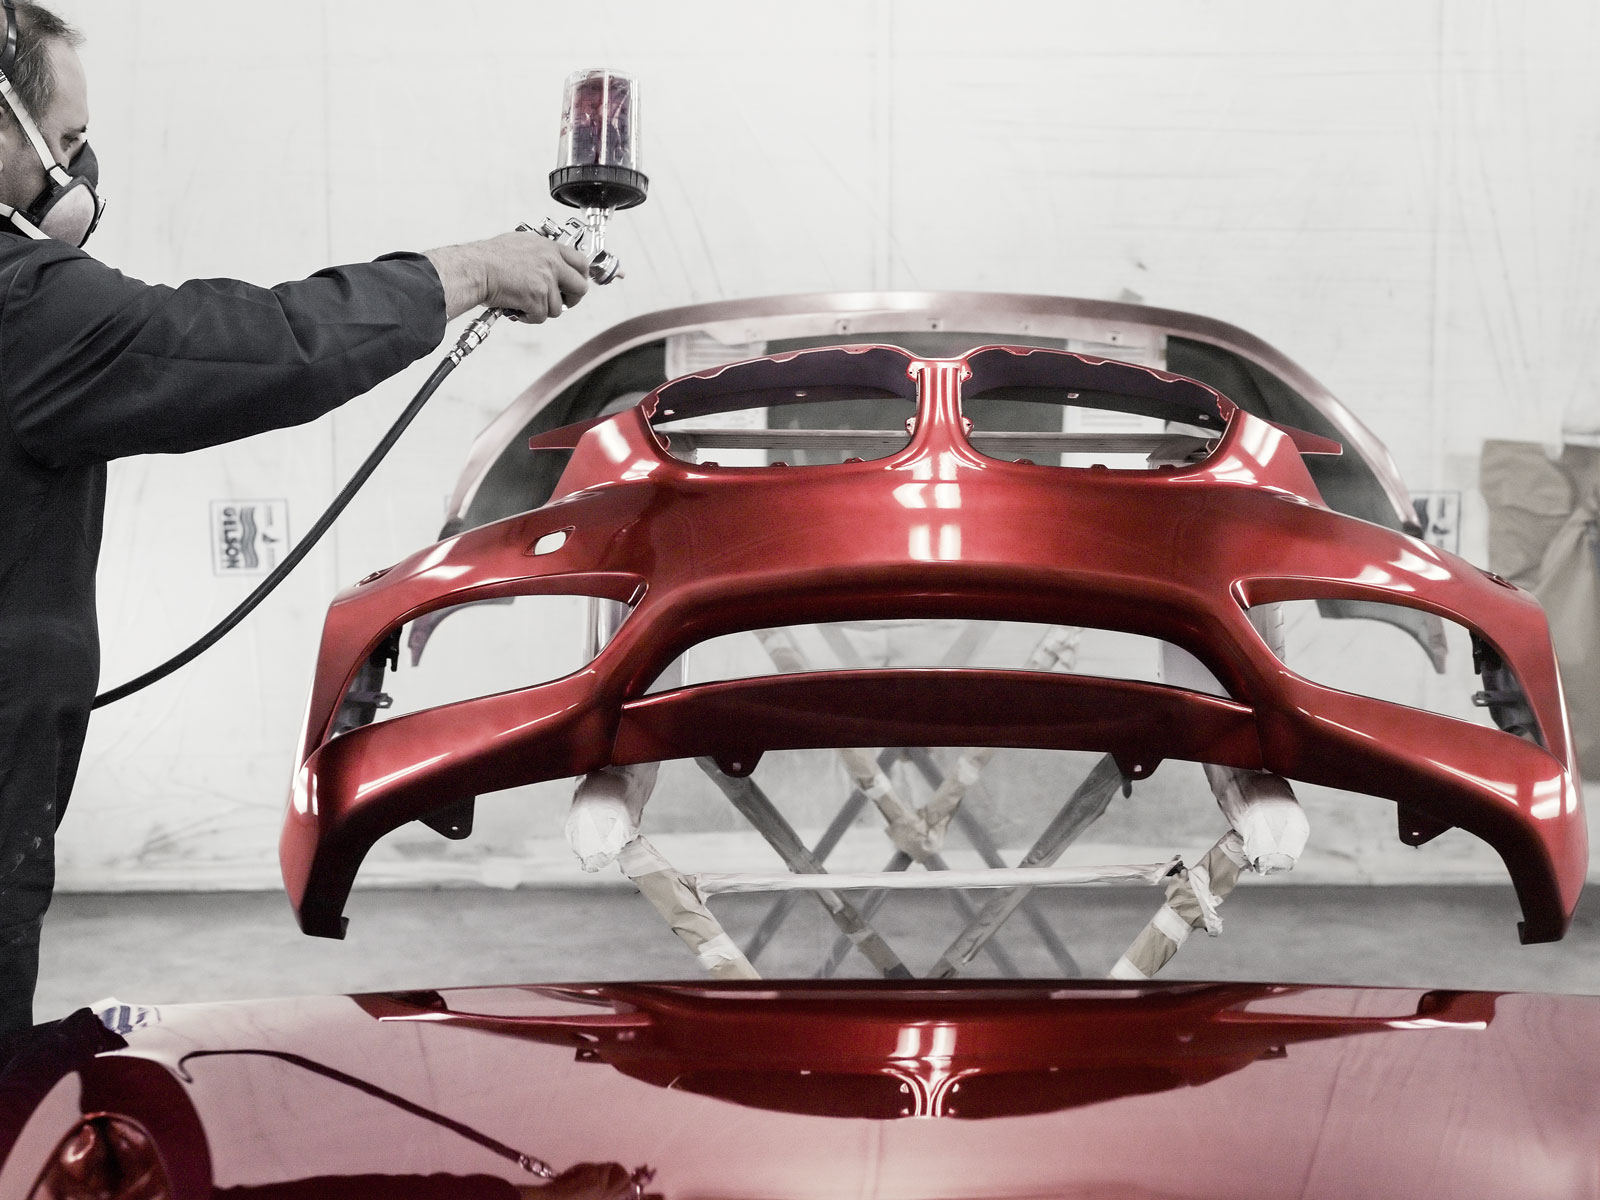 BMW Zagato Coupé, 2012 - Painting the 'Rosso Vivace' exterior colour in Milan 